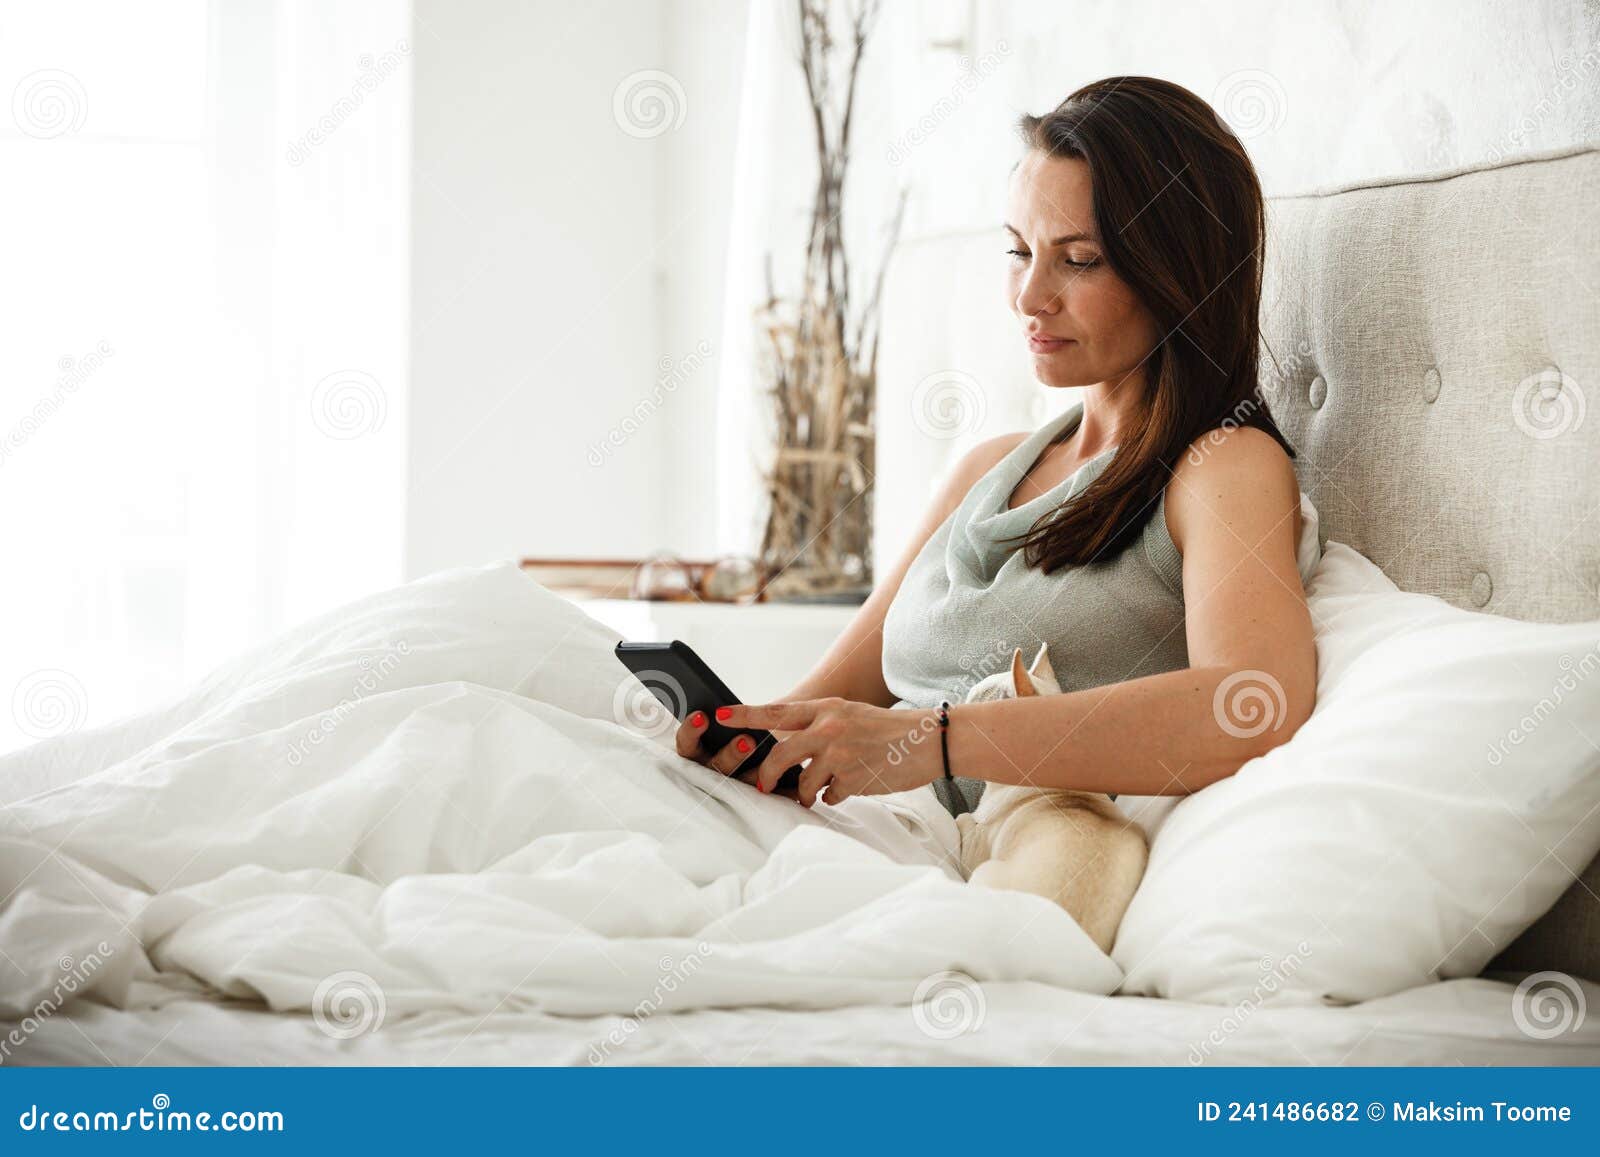 Lazy Morning Concept Beautiful Happy Woman Wakes Up In Bed And Surfes 